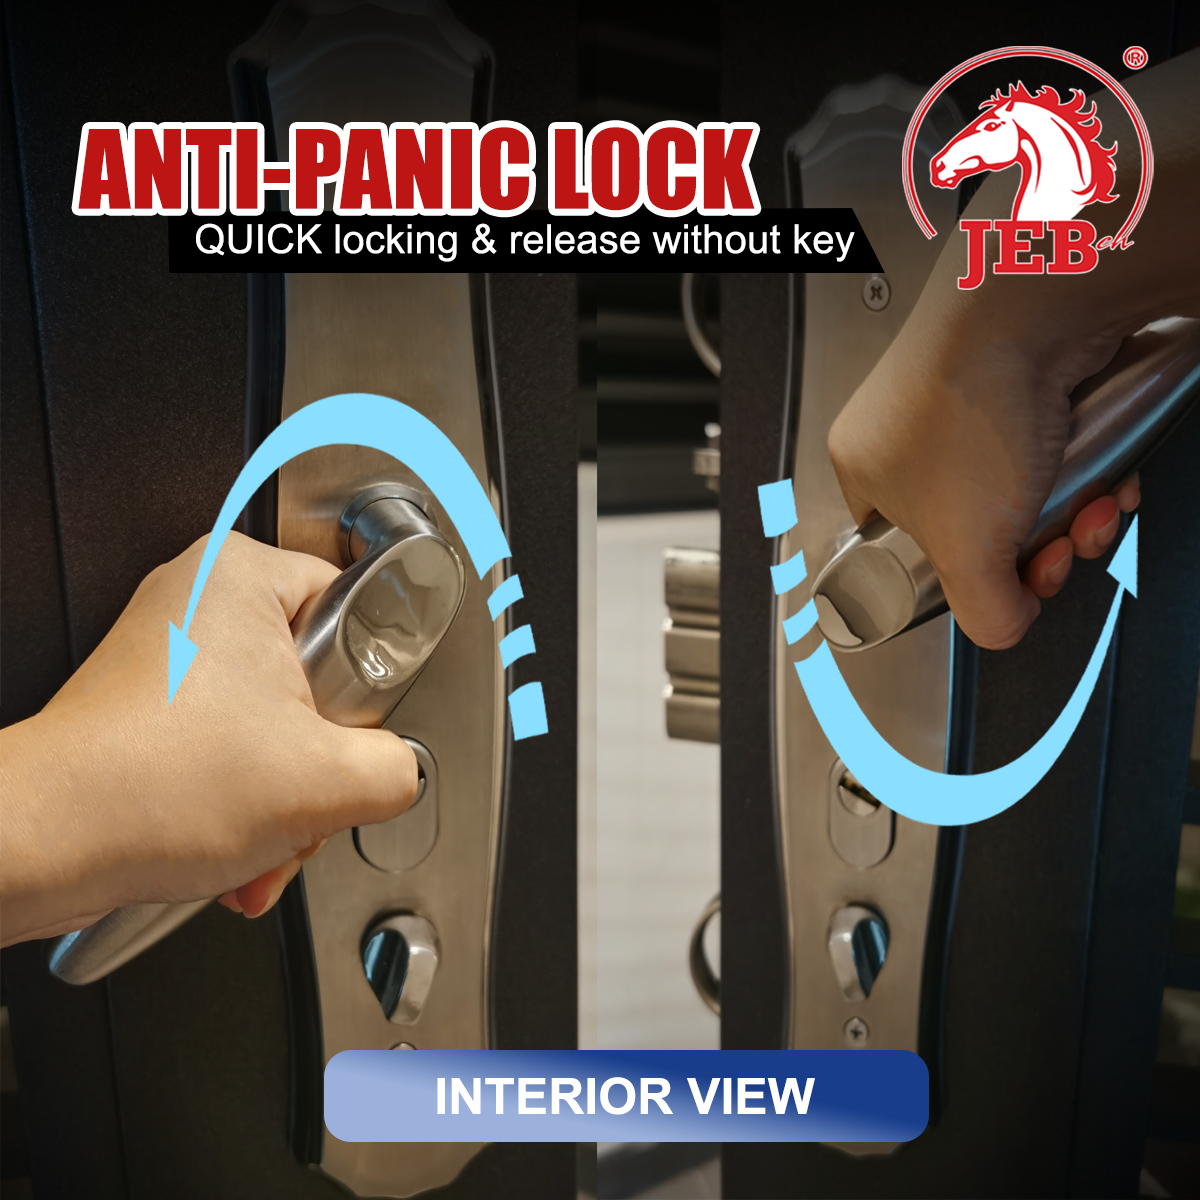 the Anti-Panic Lock for Security Door by JEB